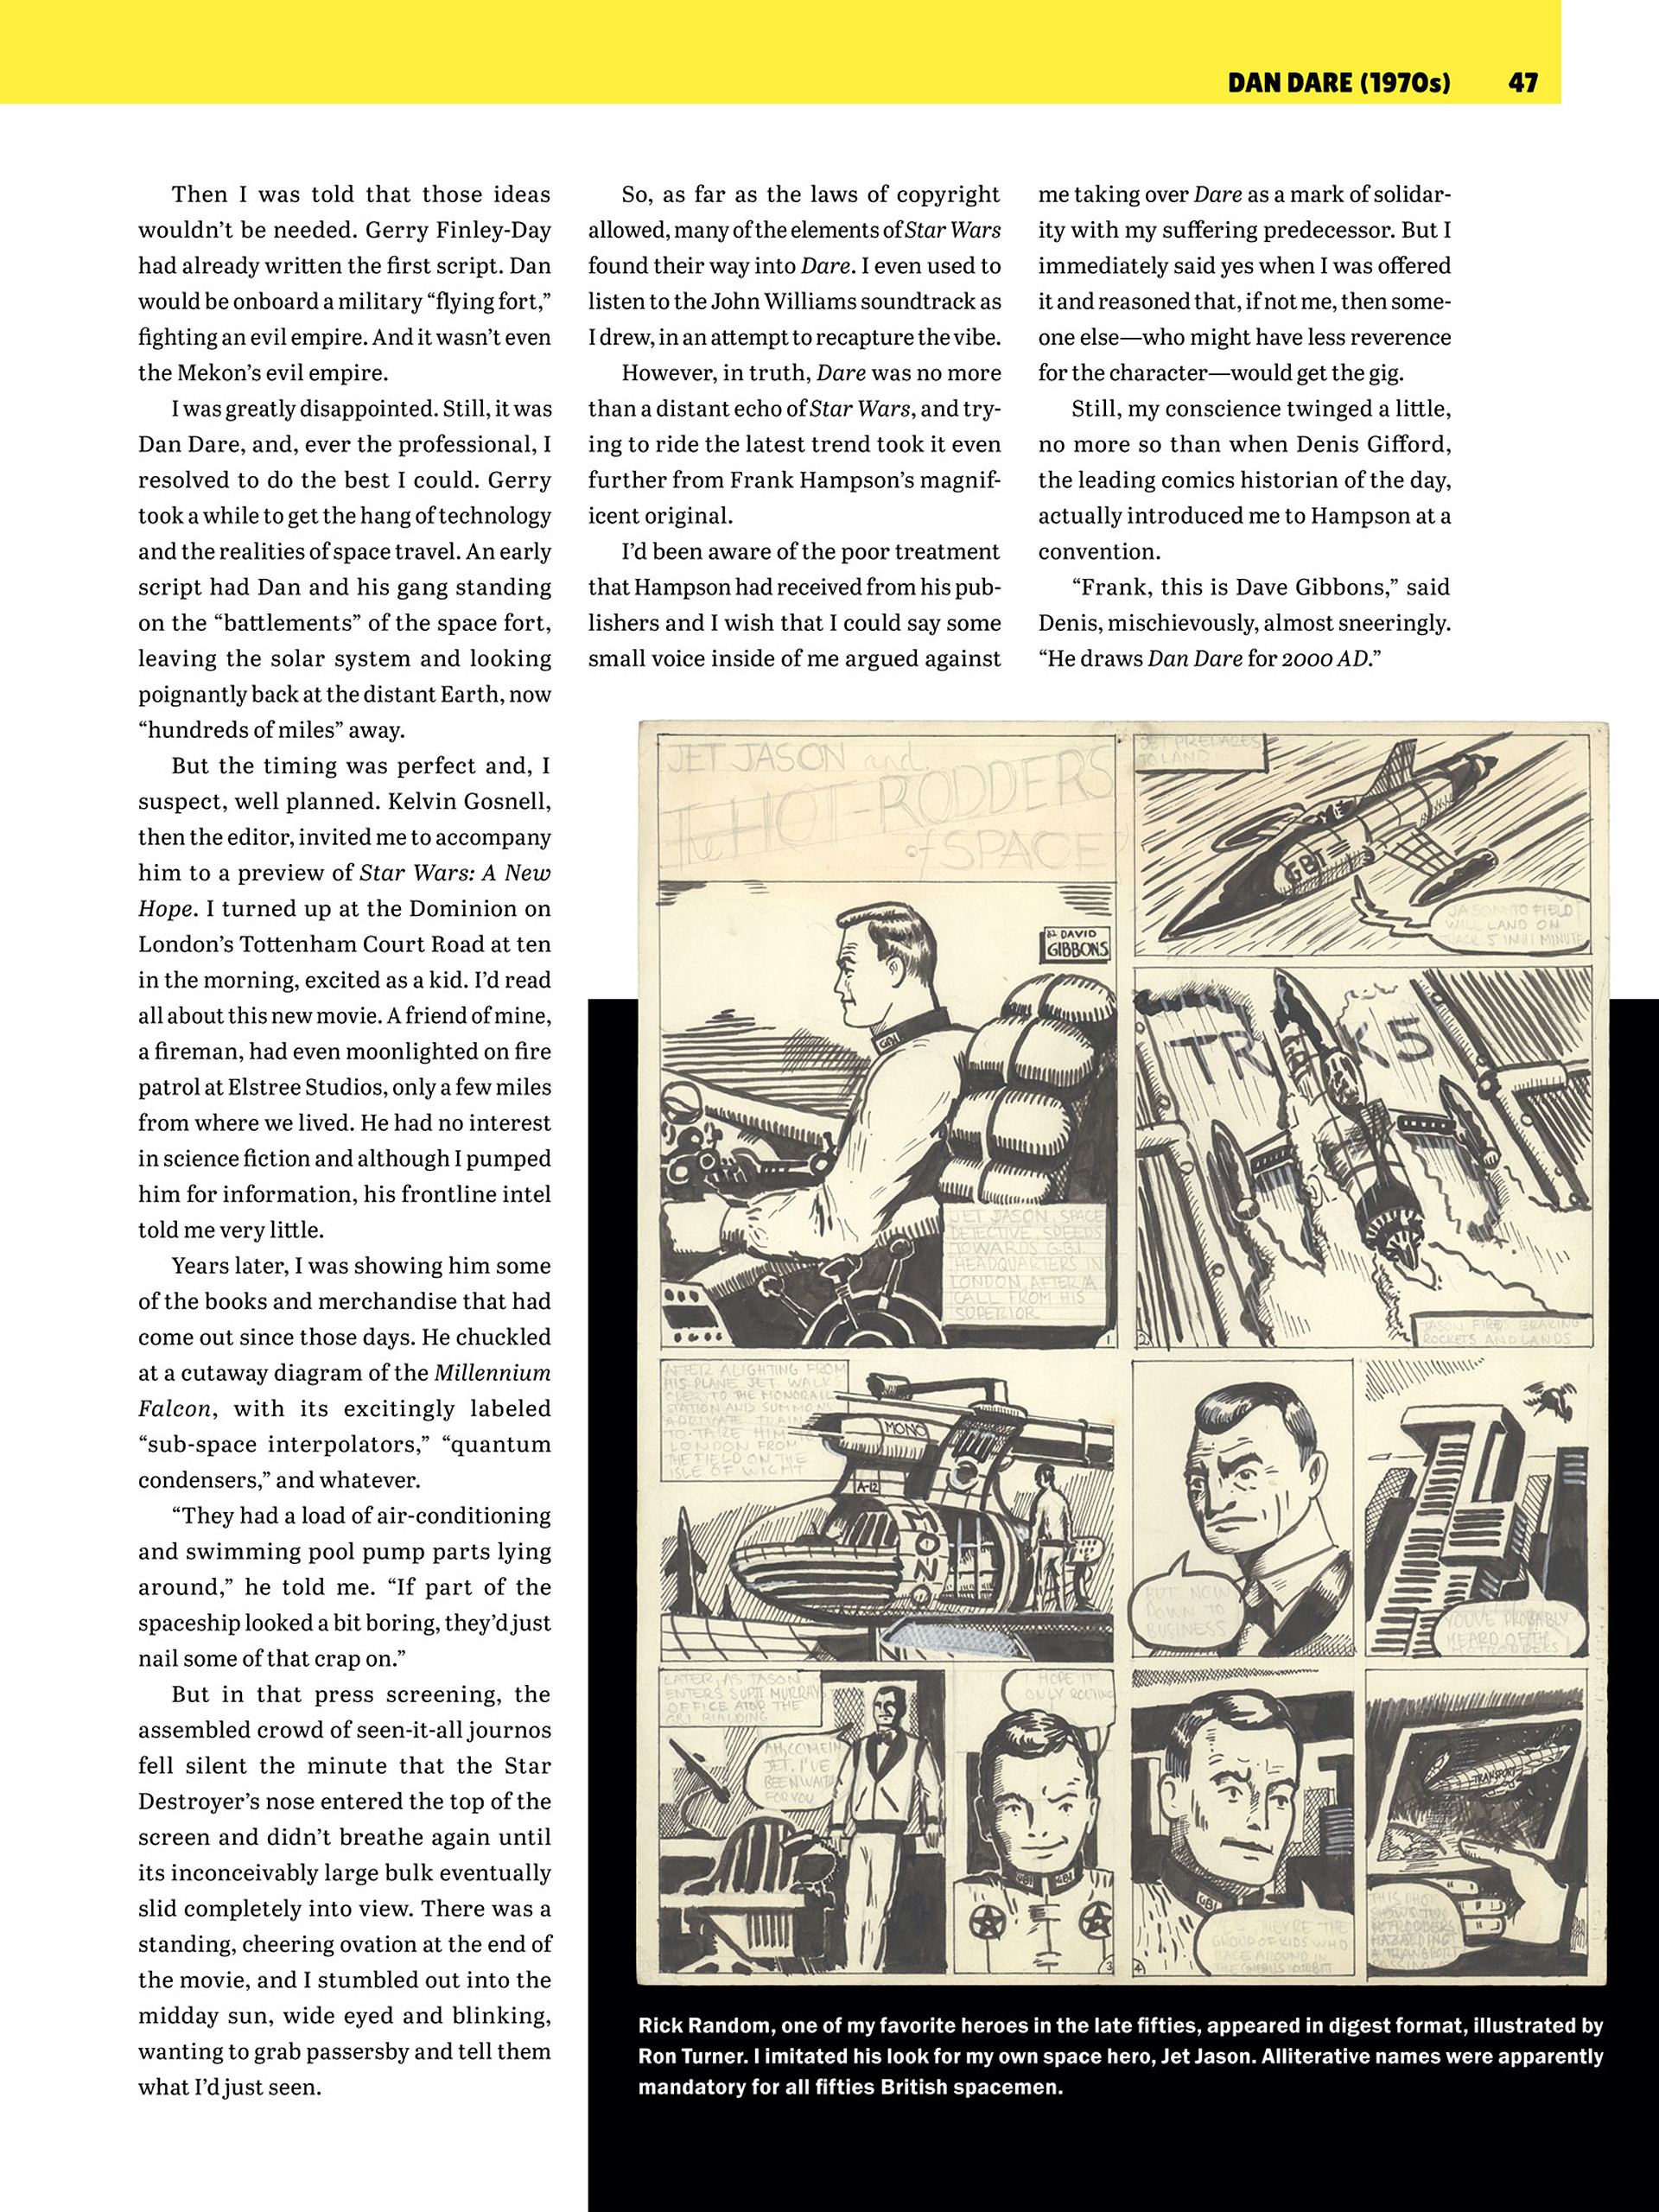 Read online Confabulation: An Anecdotal Autobiography comic -  Issue # TPB (Part 1) - 47